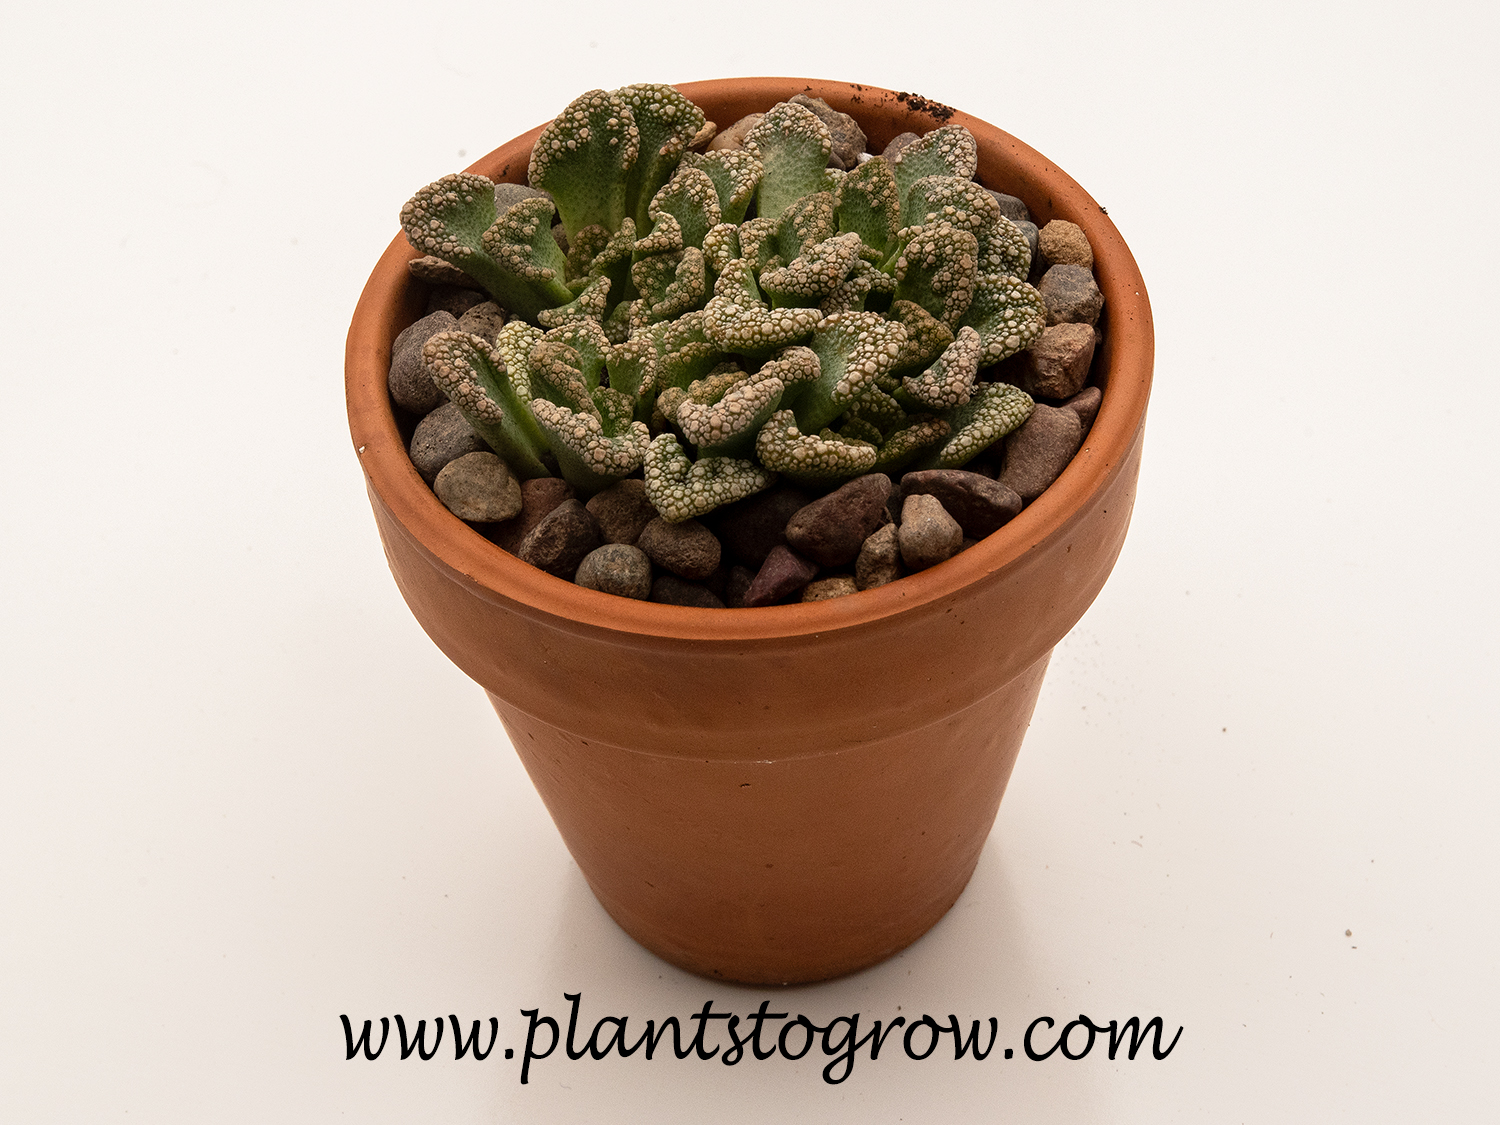 Concrete Leaf (Titanopsis calcarea)
Growing in a 3 inch clay pot.